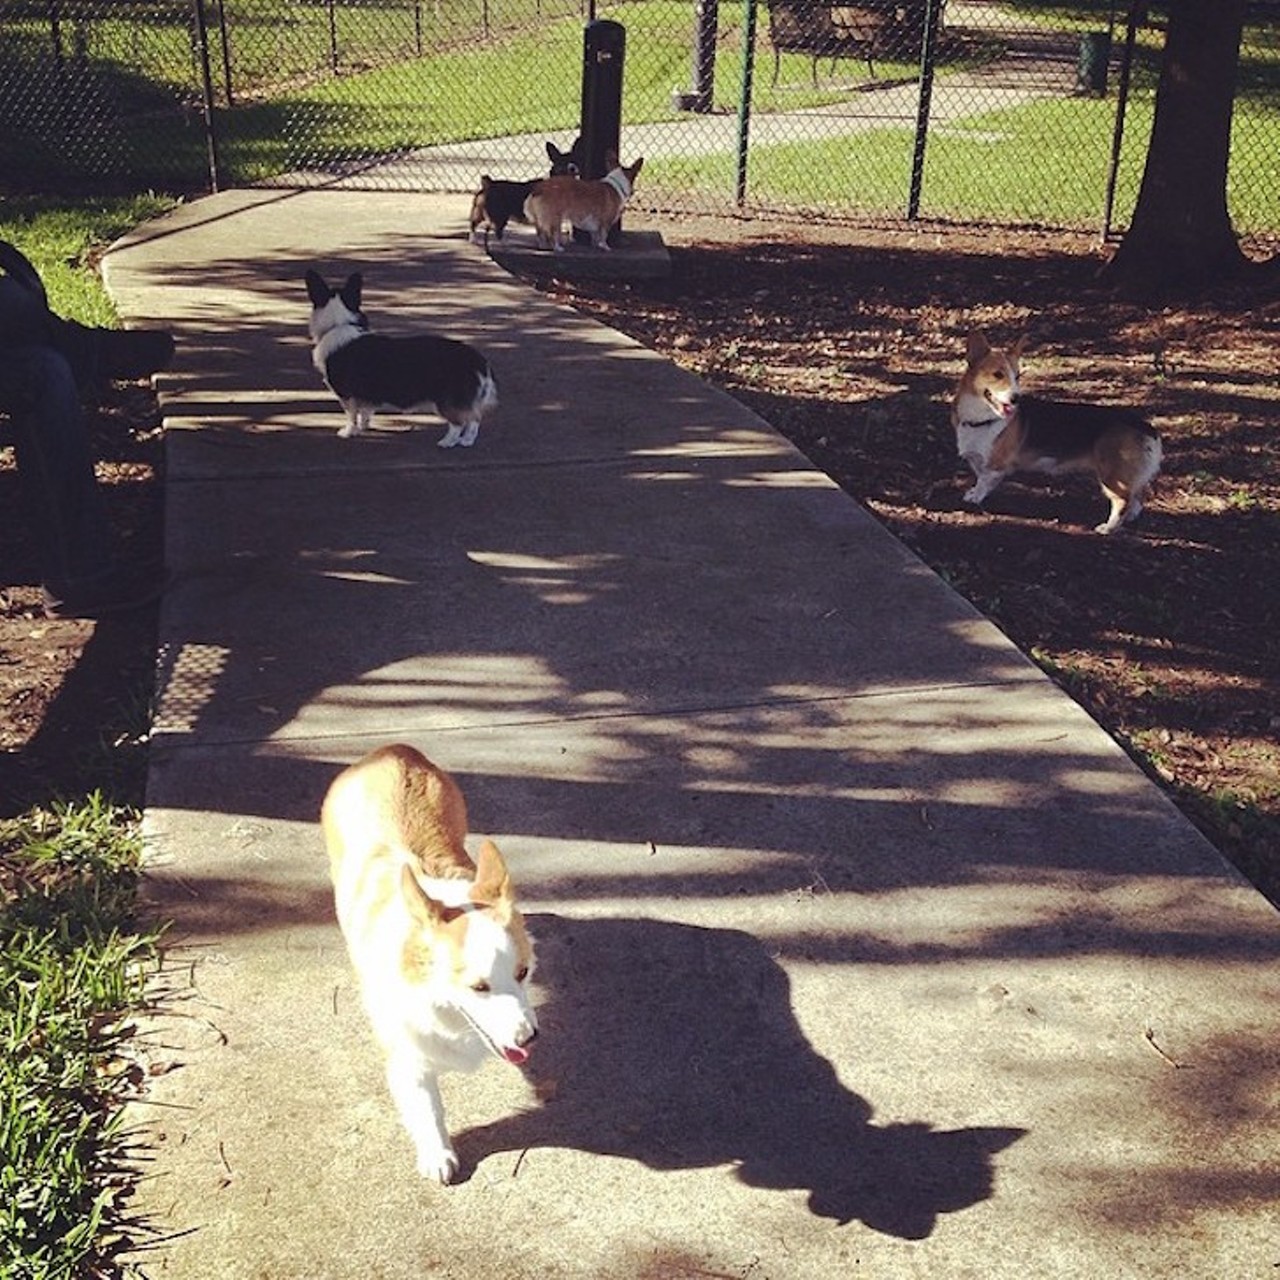 Yucatan Dog Park
6400 Yucatan Drive 
Looking for a nice and relaxing place to hang with your pup? Yucatan Dog Park has plenty of open space for you and your furry friend to play fetch or run together. 
lulunationcorgis/Instagram